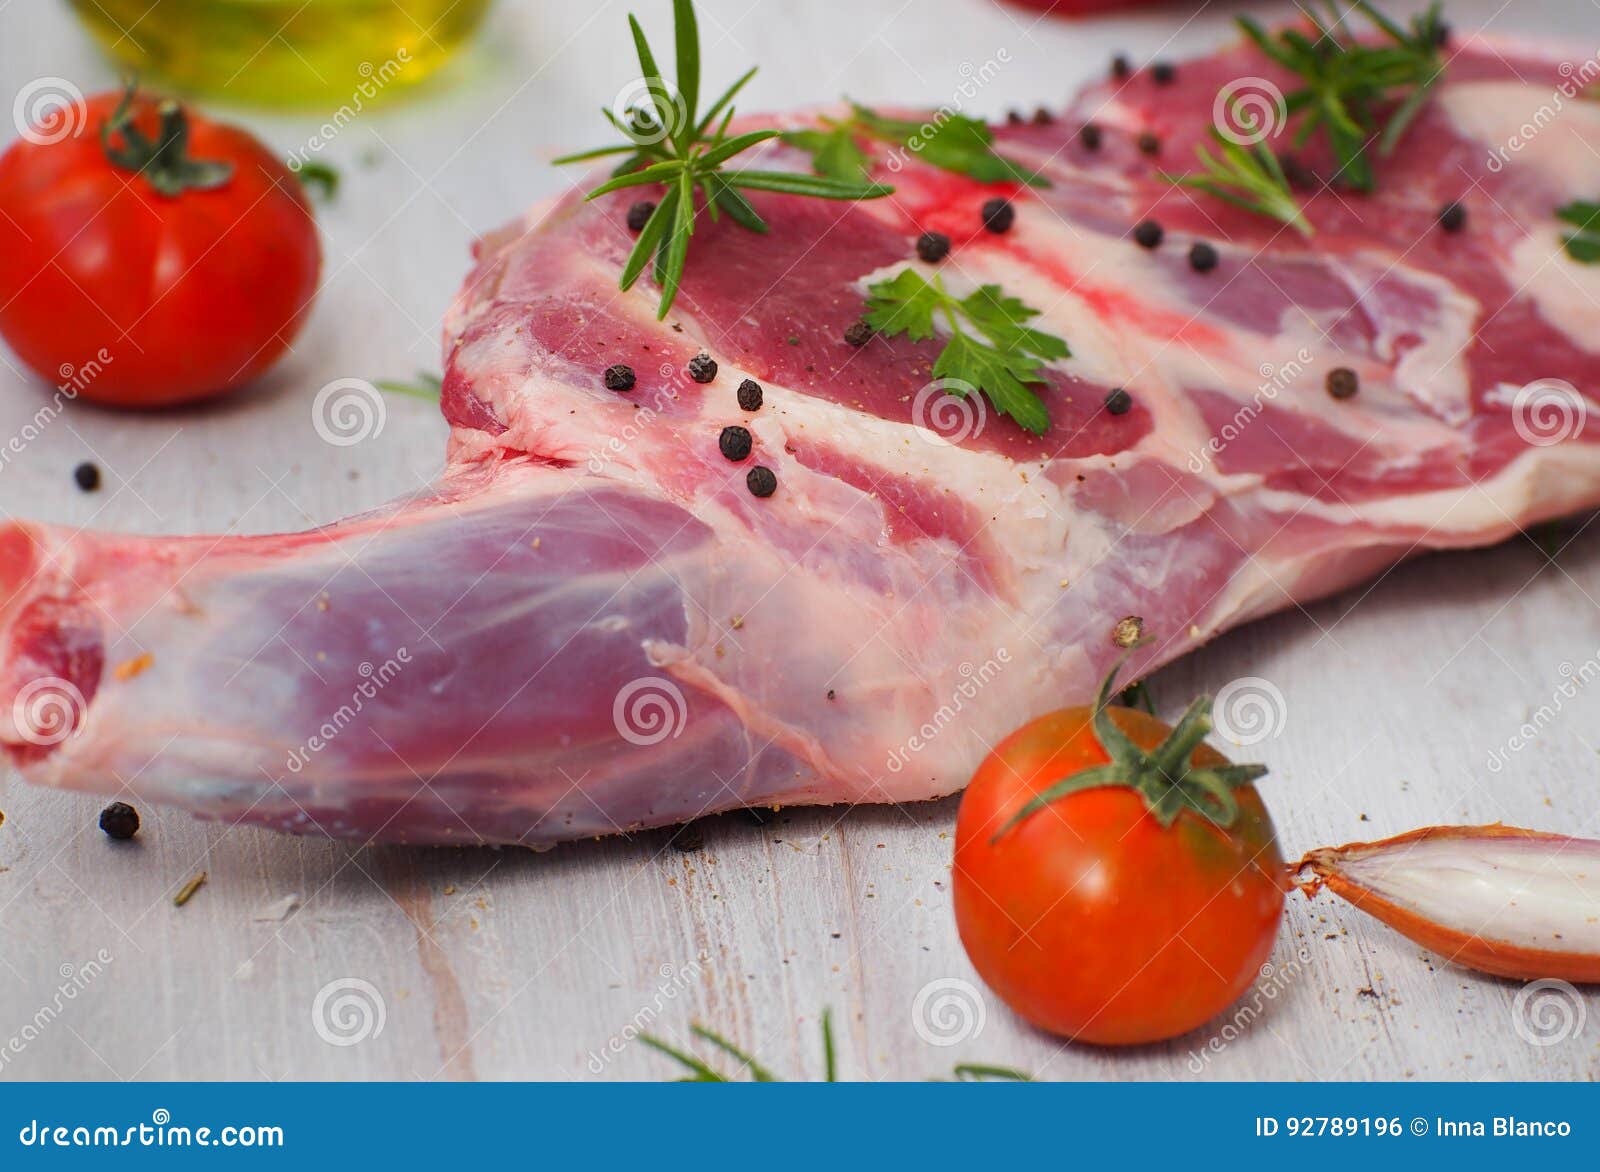 fresh and raw meat. leg of lamb on wood background